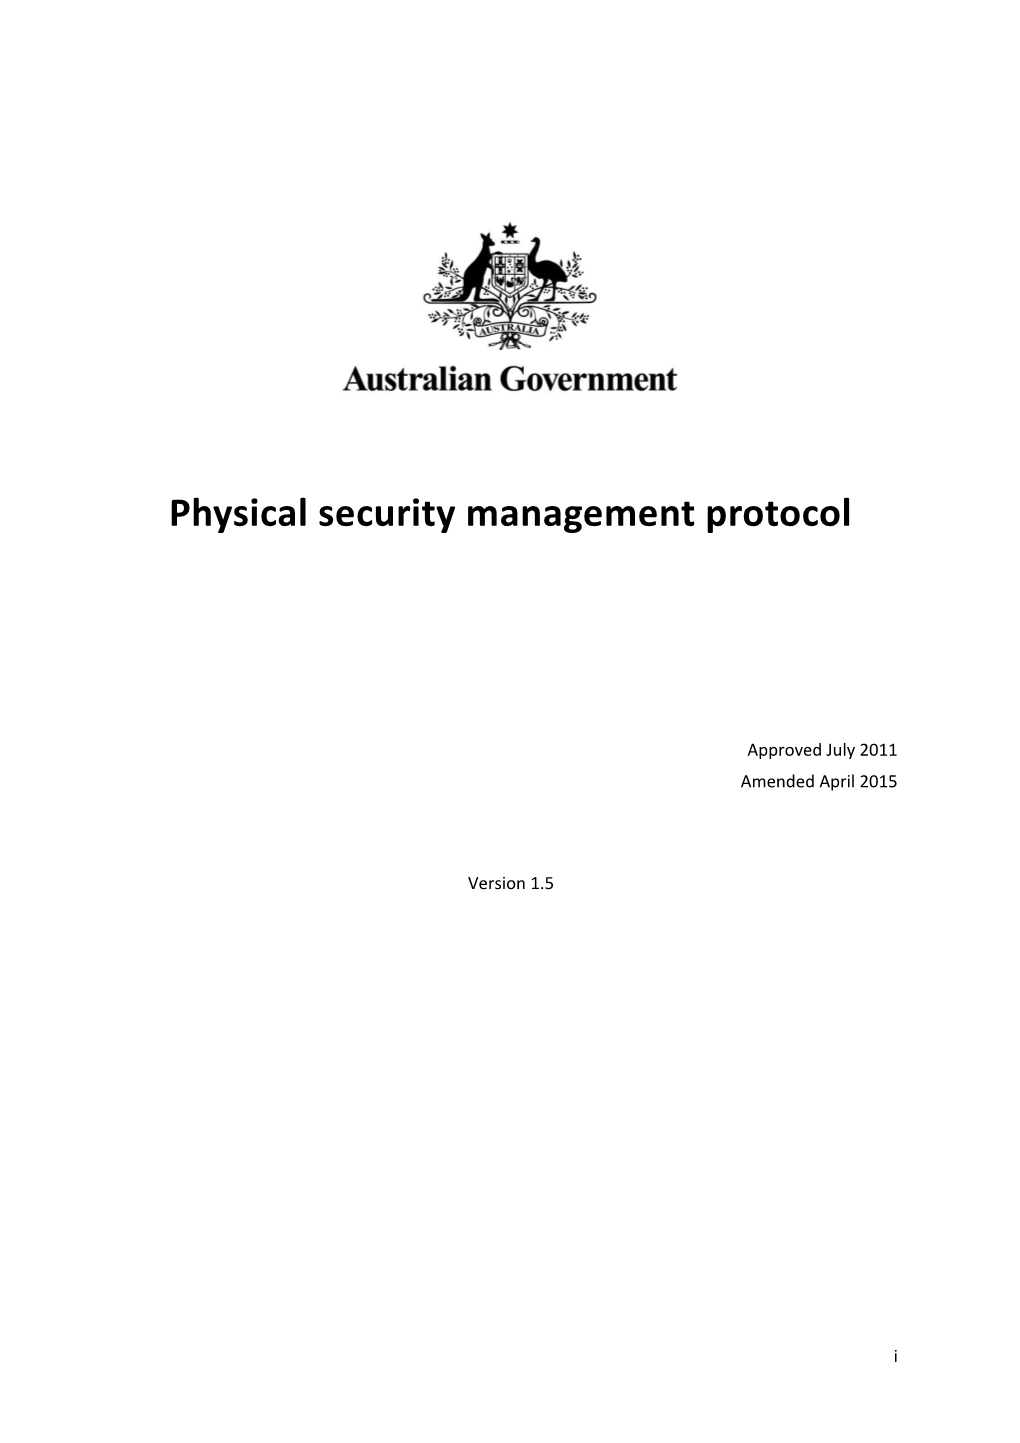 Physical Security Management Protocol